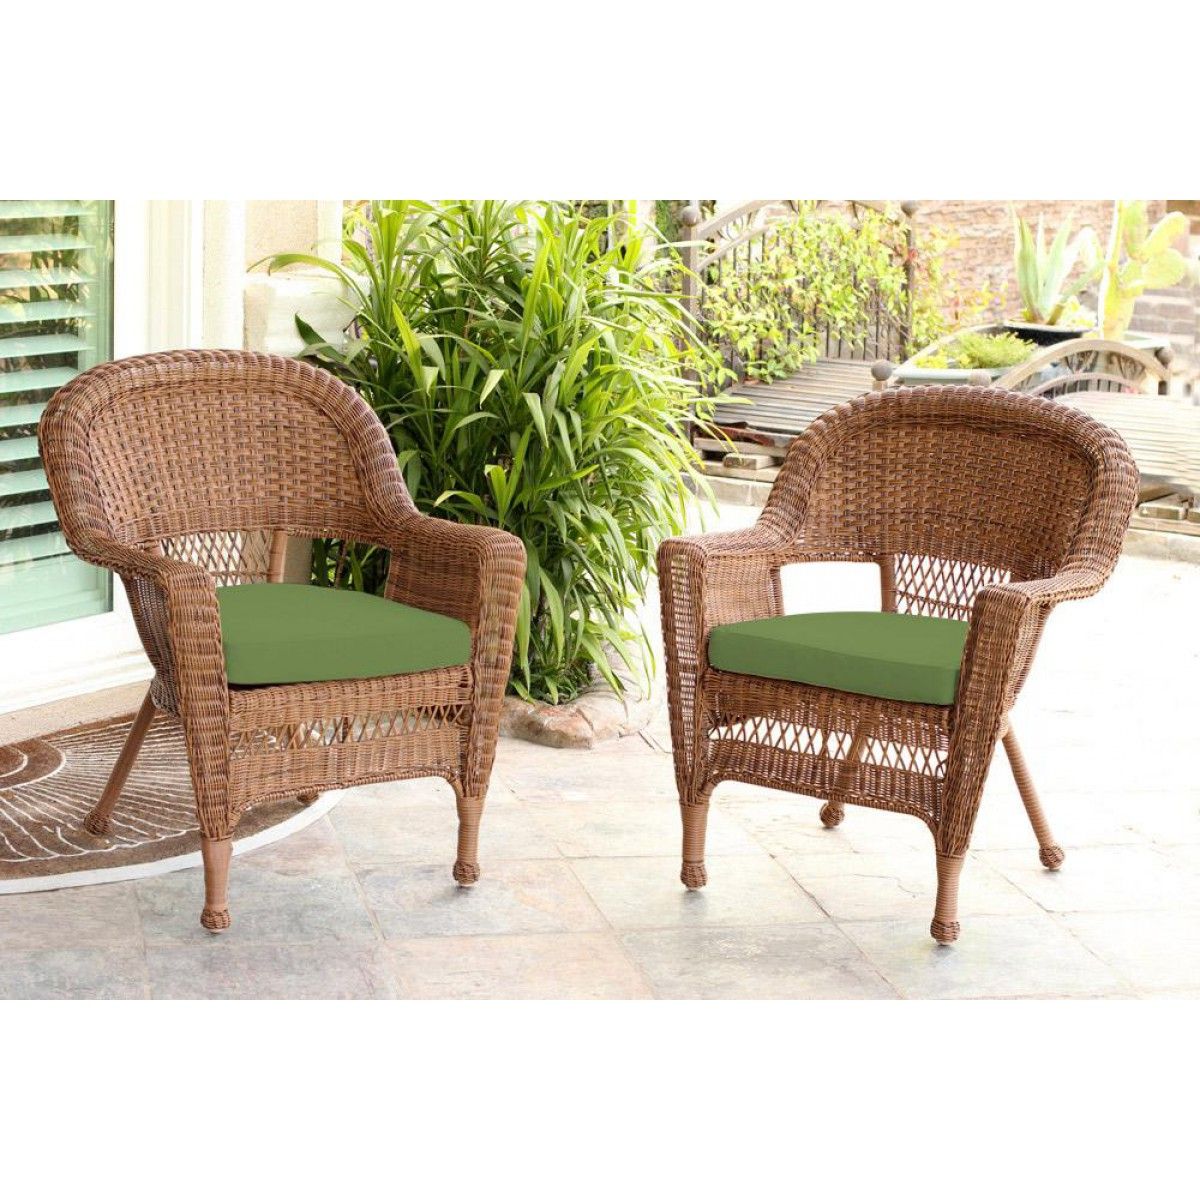 Best And Newest Green Rattan Outdoor Rocking Chair Sets Regarding Honey Wicker Chair With Hunter Green Cushion – Set Of  (View 3 of 15)